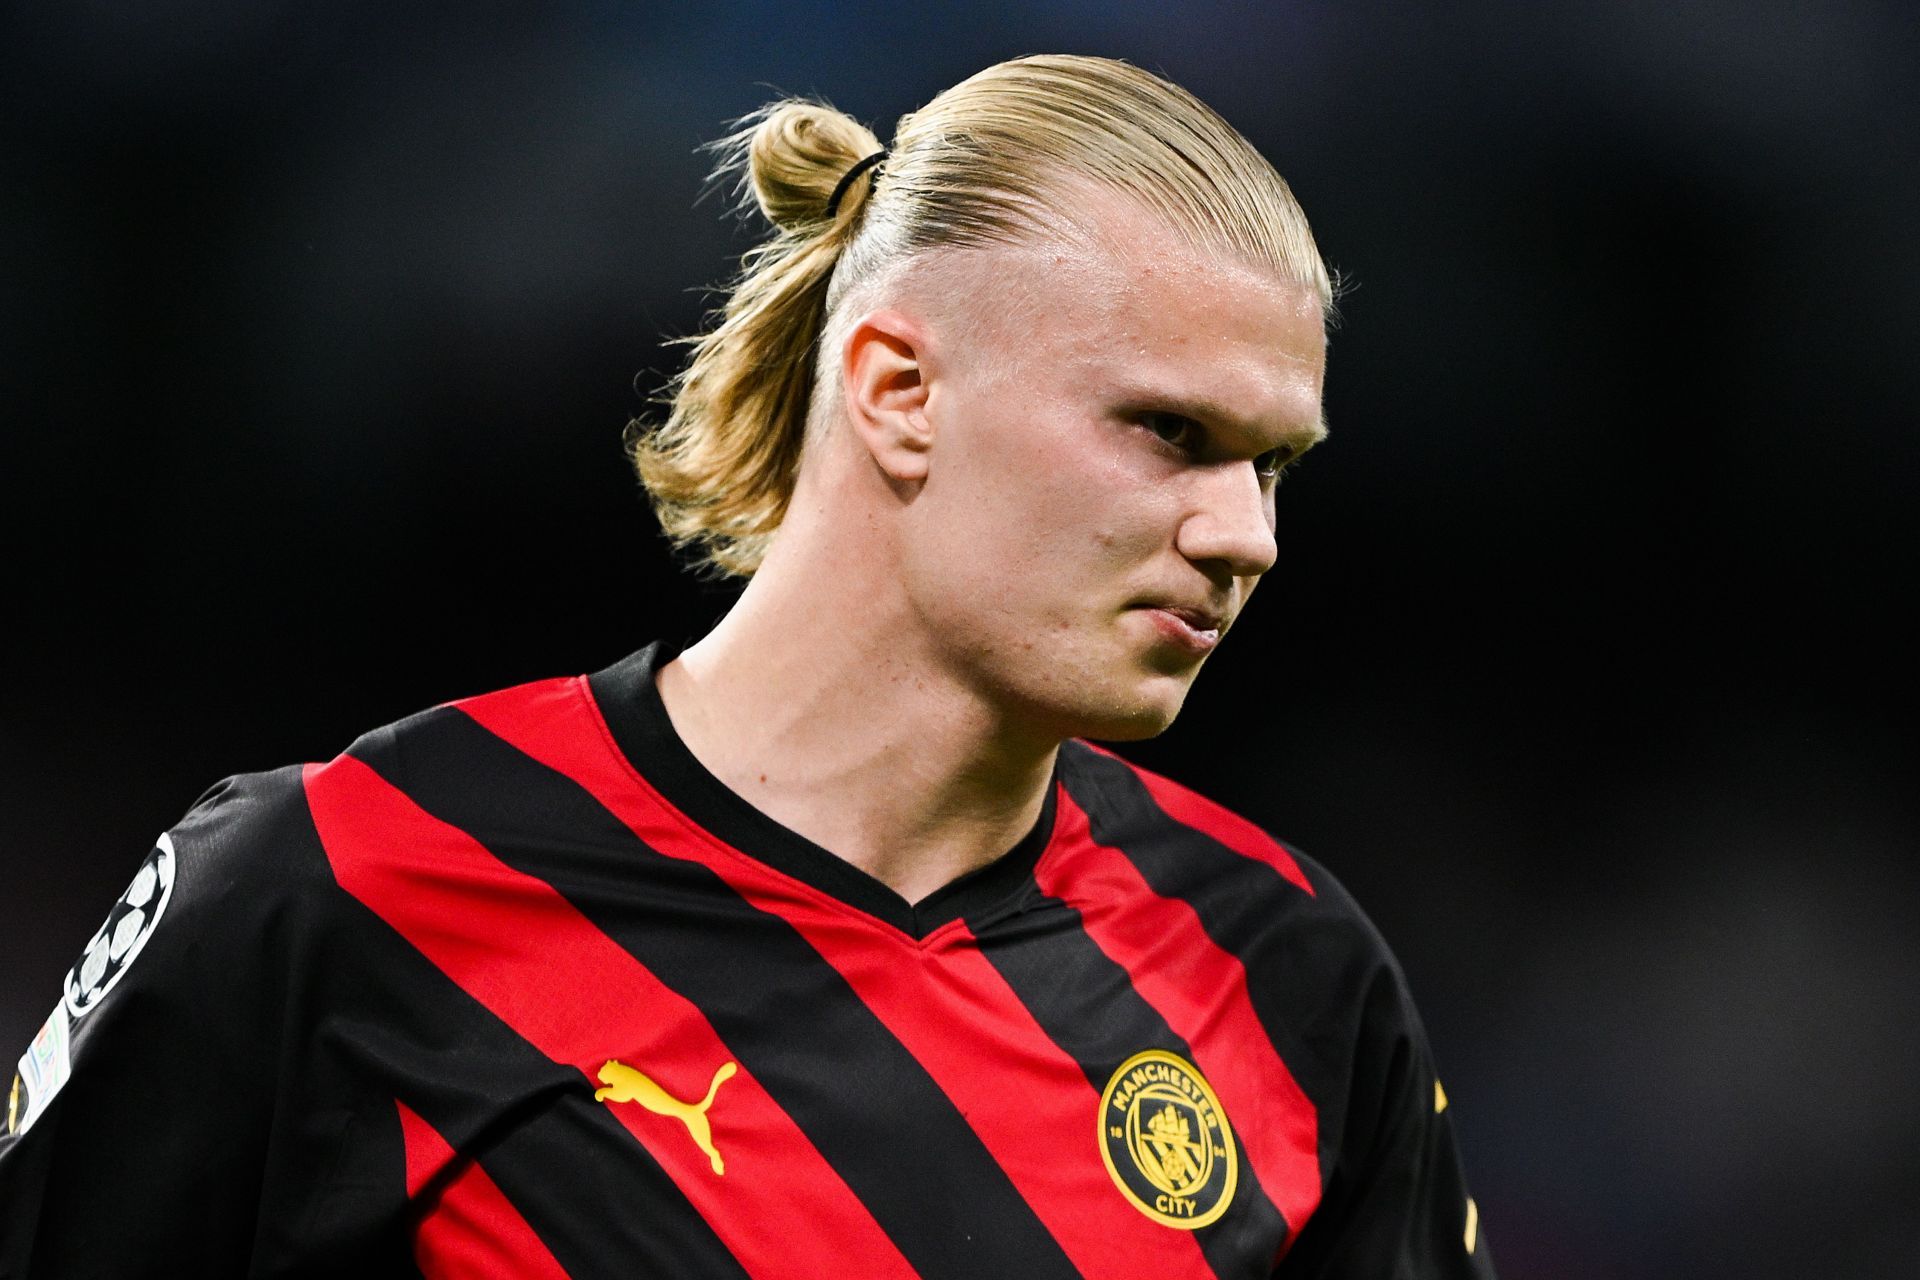 Erling Haaland - Real Madrid v Manchester City FC: Semi-Final First Leg - UEFA Champions League 2022-23 campaign